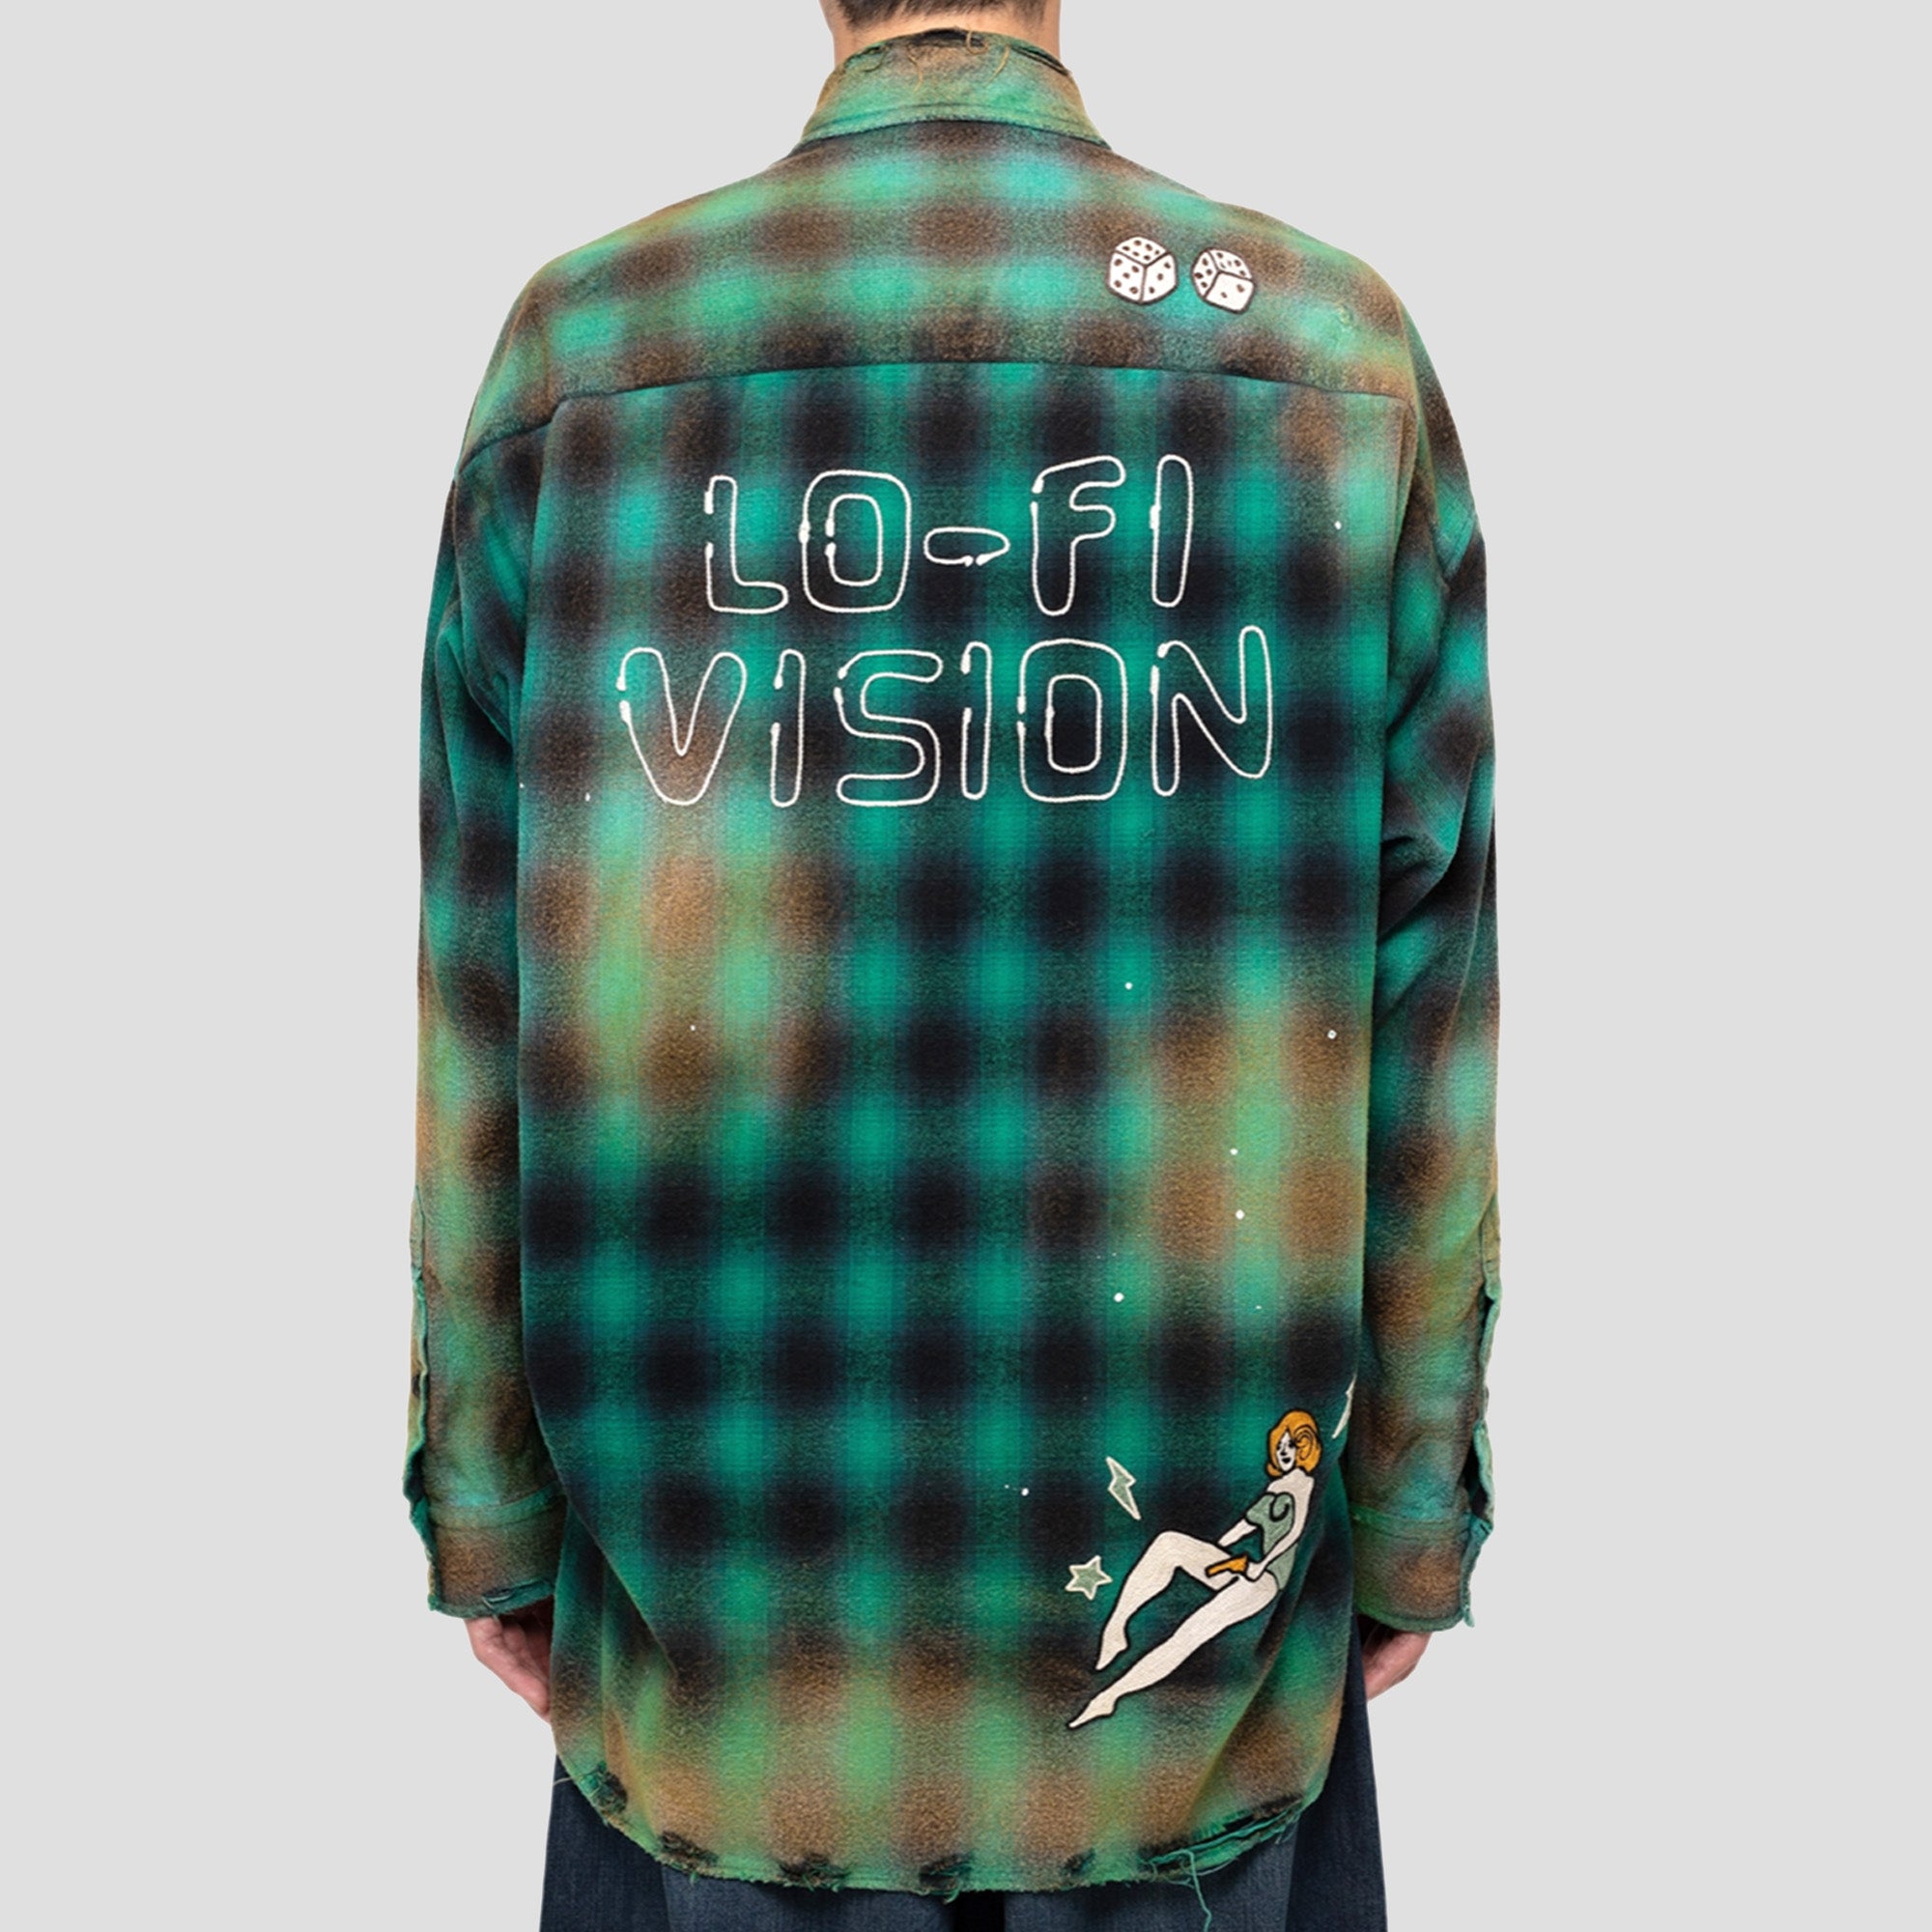 DISTRESSED OVERSIZED FLANNEL SHIRT